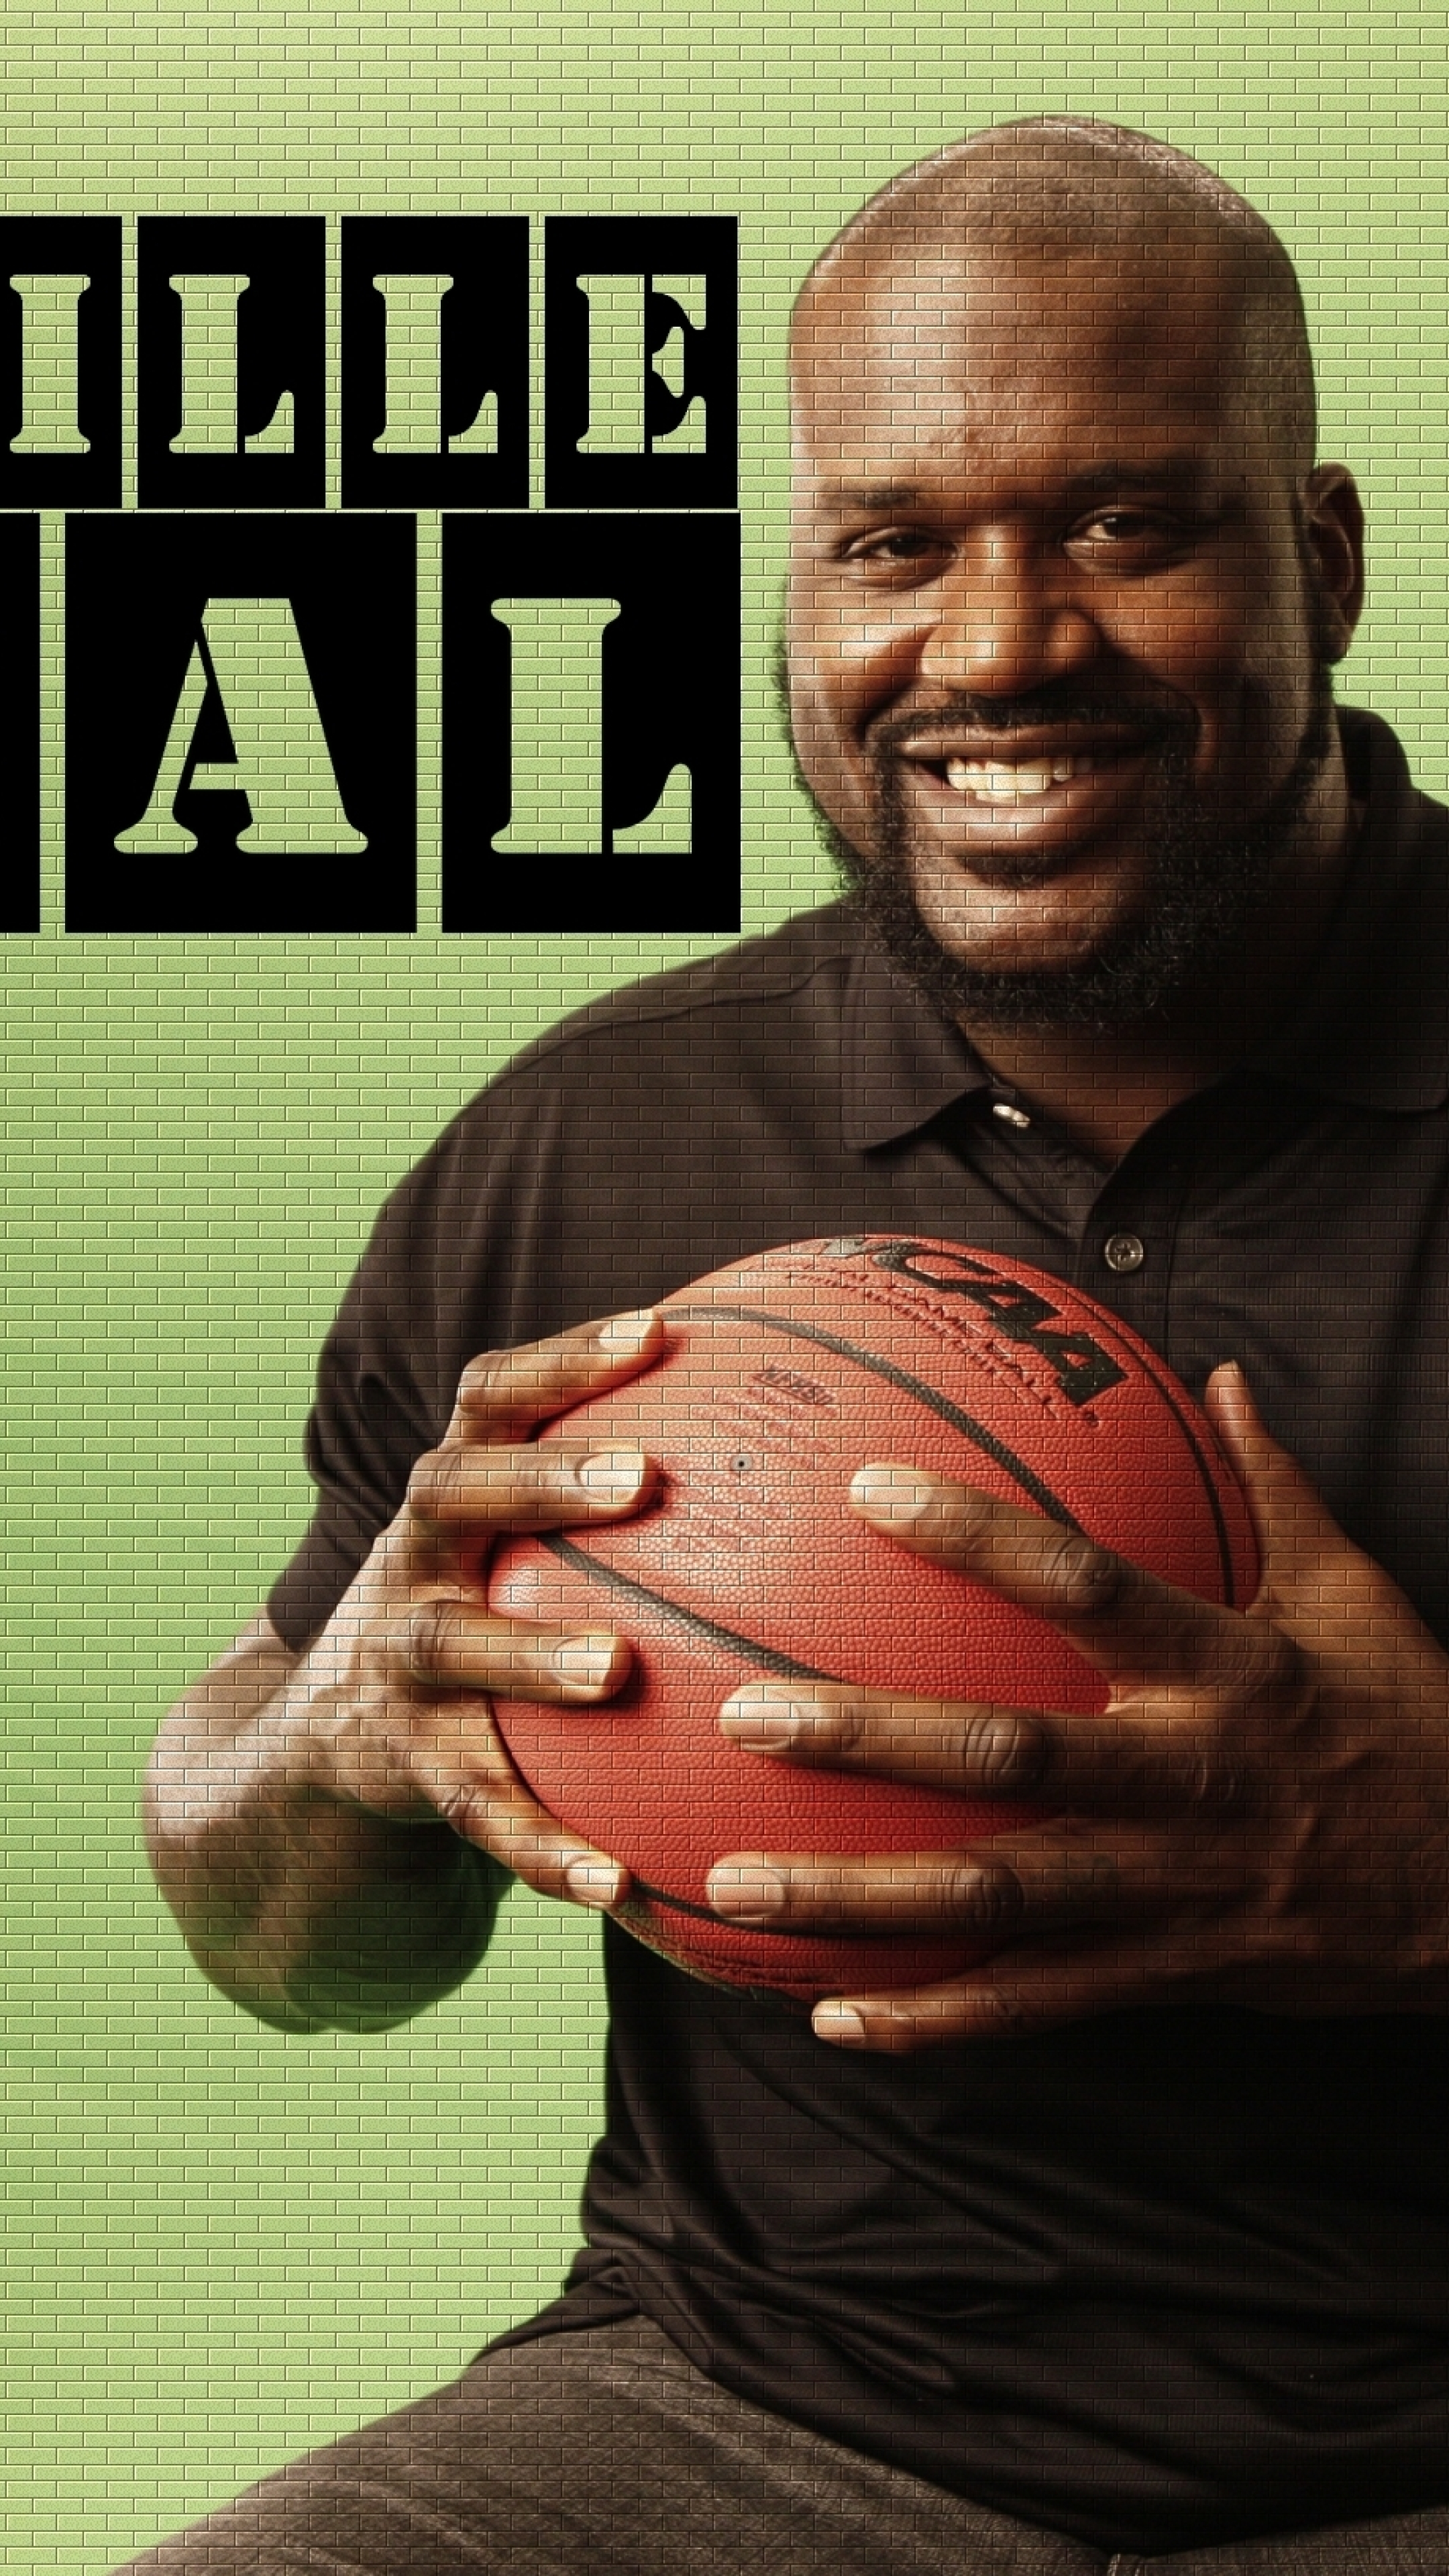 Shaquille Oneal Holding A Basketball - 2160x3840 Wallpaper - teahub.io.